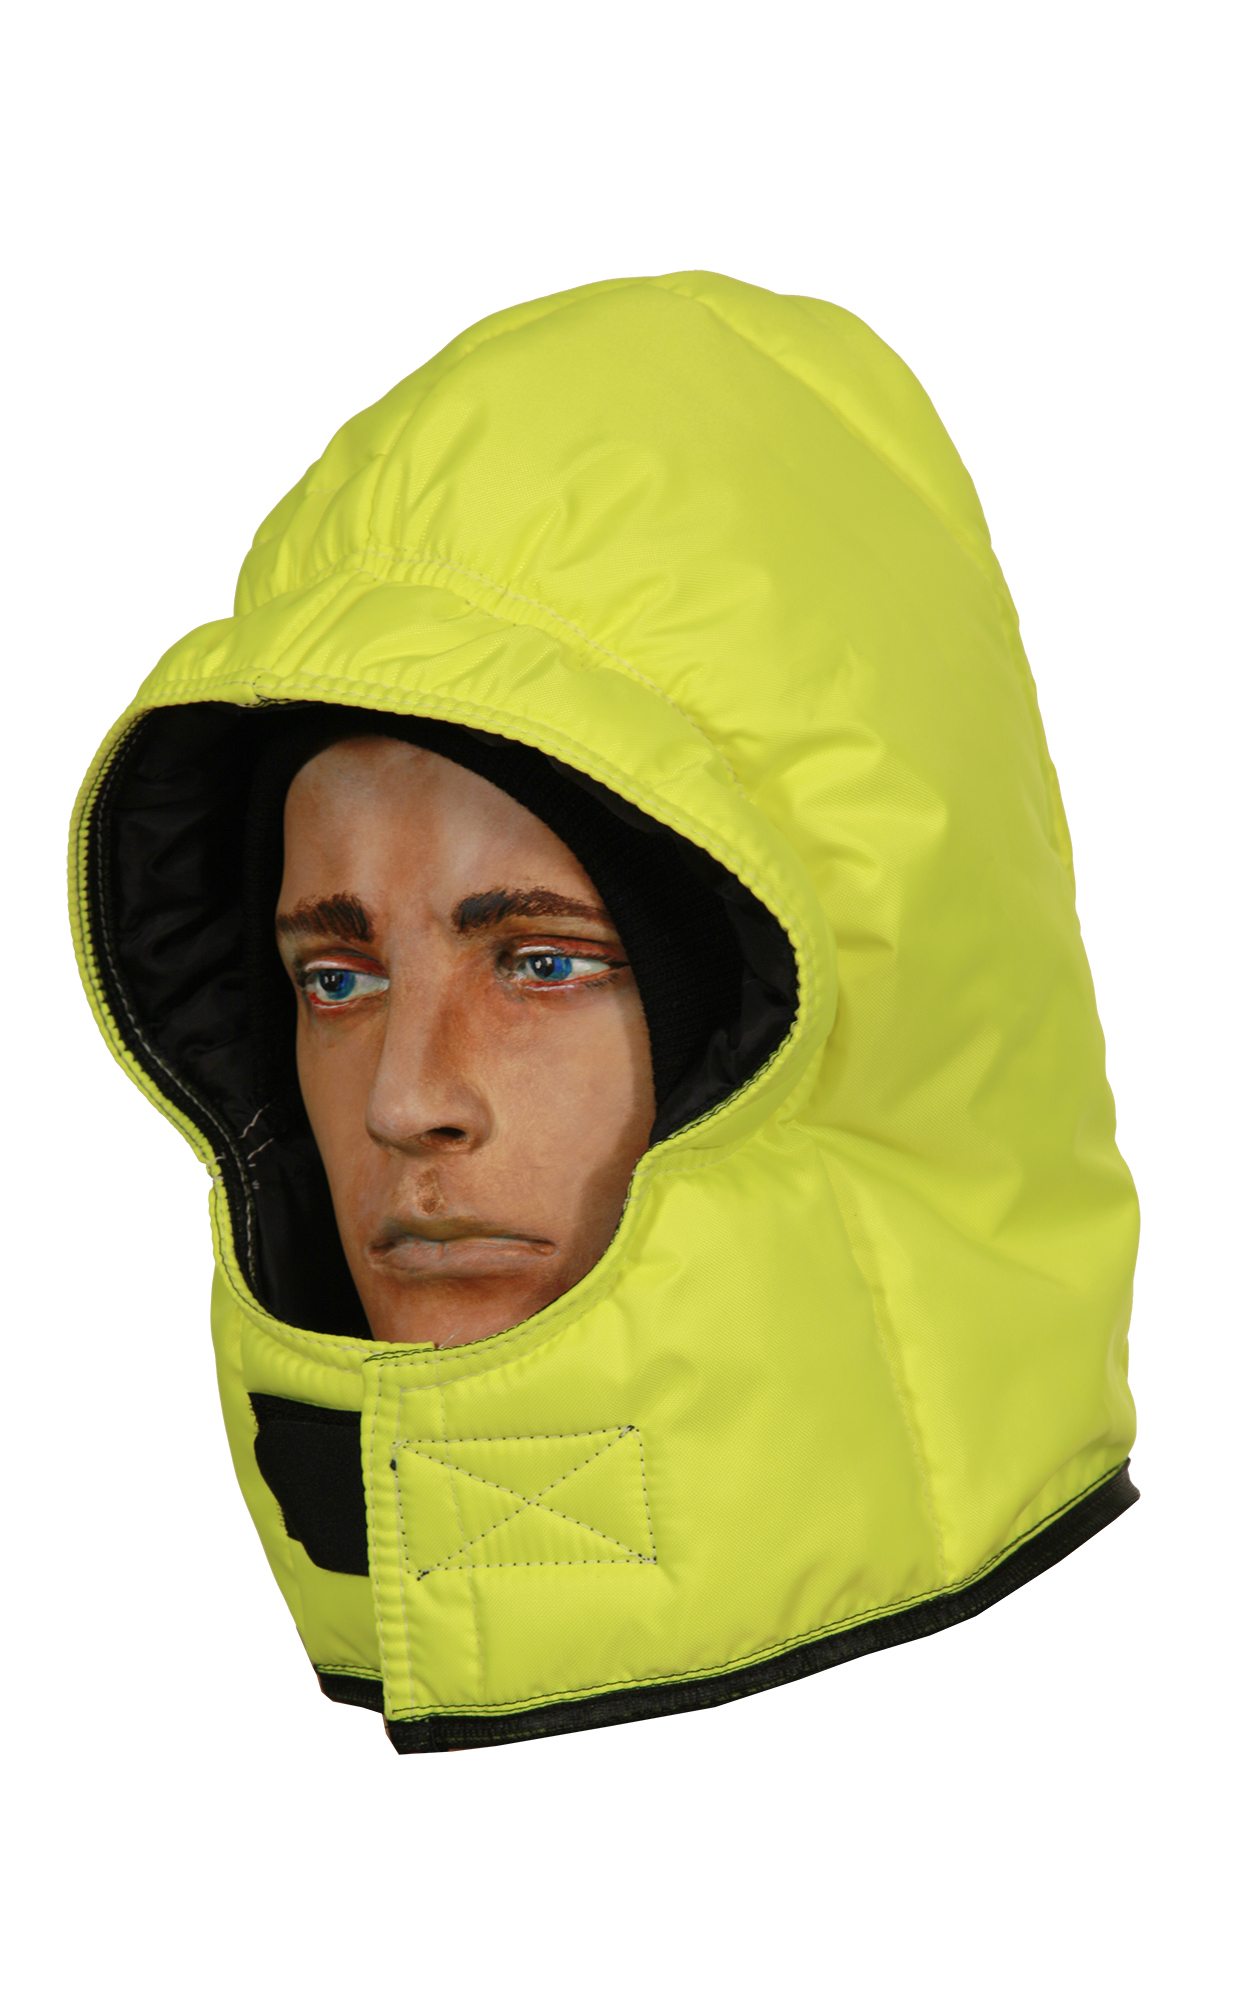 High Visibility Insulated Hood MADE IN USA